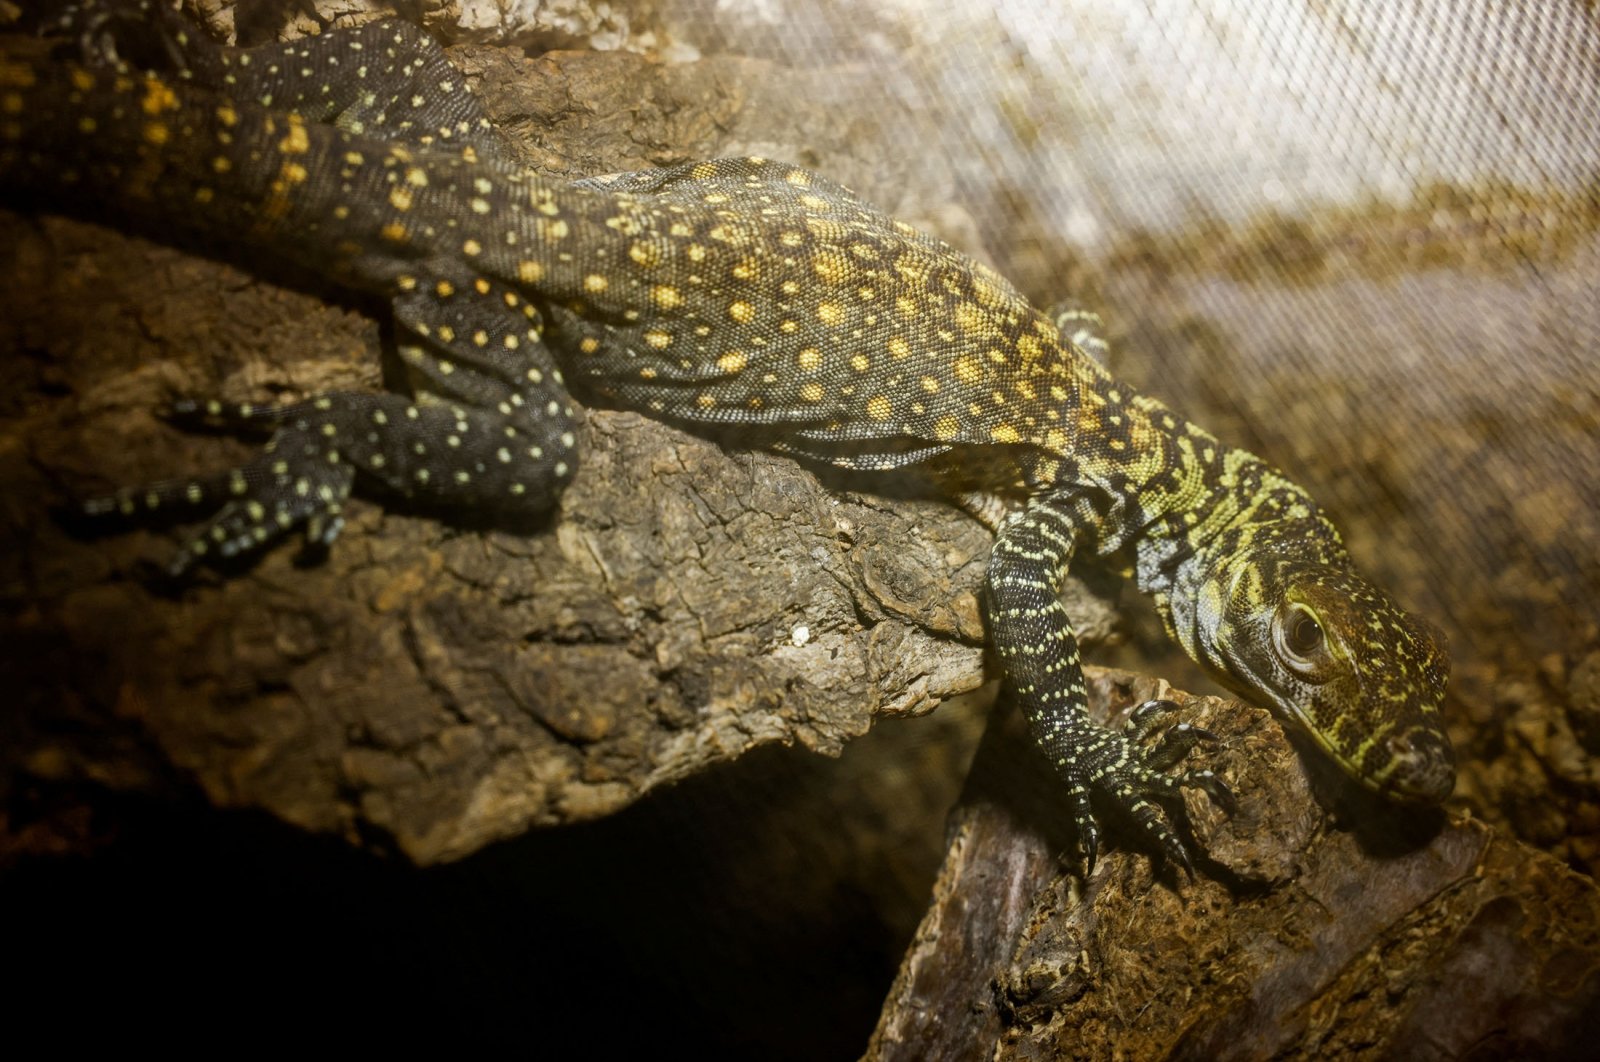 Drakaris, a one-month-old baby Komodo dragon, one of five Komodo dragons born at Bioparc Fuengirola, rests in a terrarium in Fuengirola, southern Spain, March 28, 2023. (Reuters Photo)